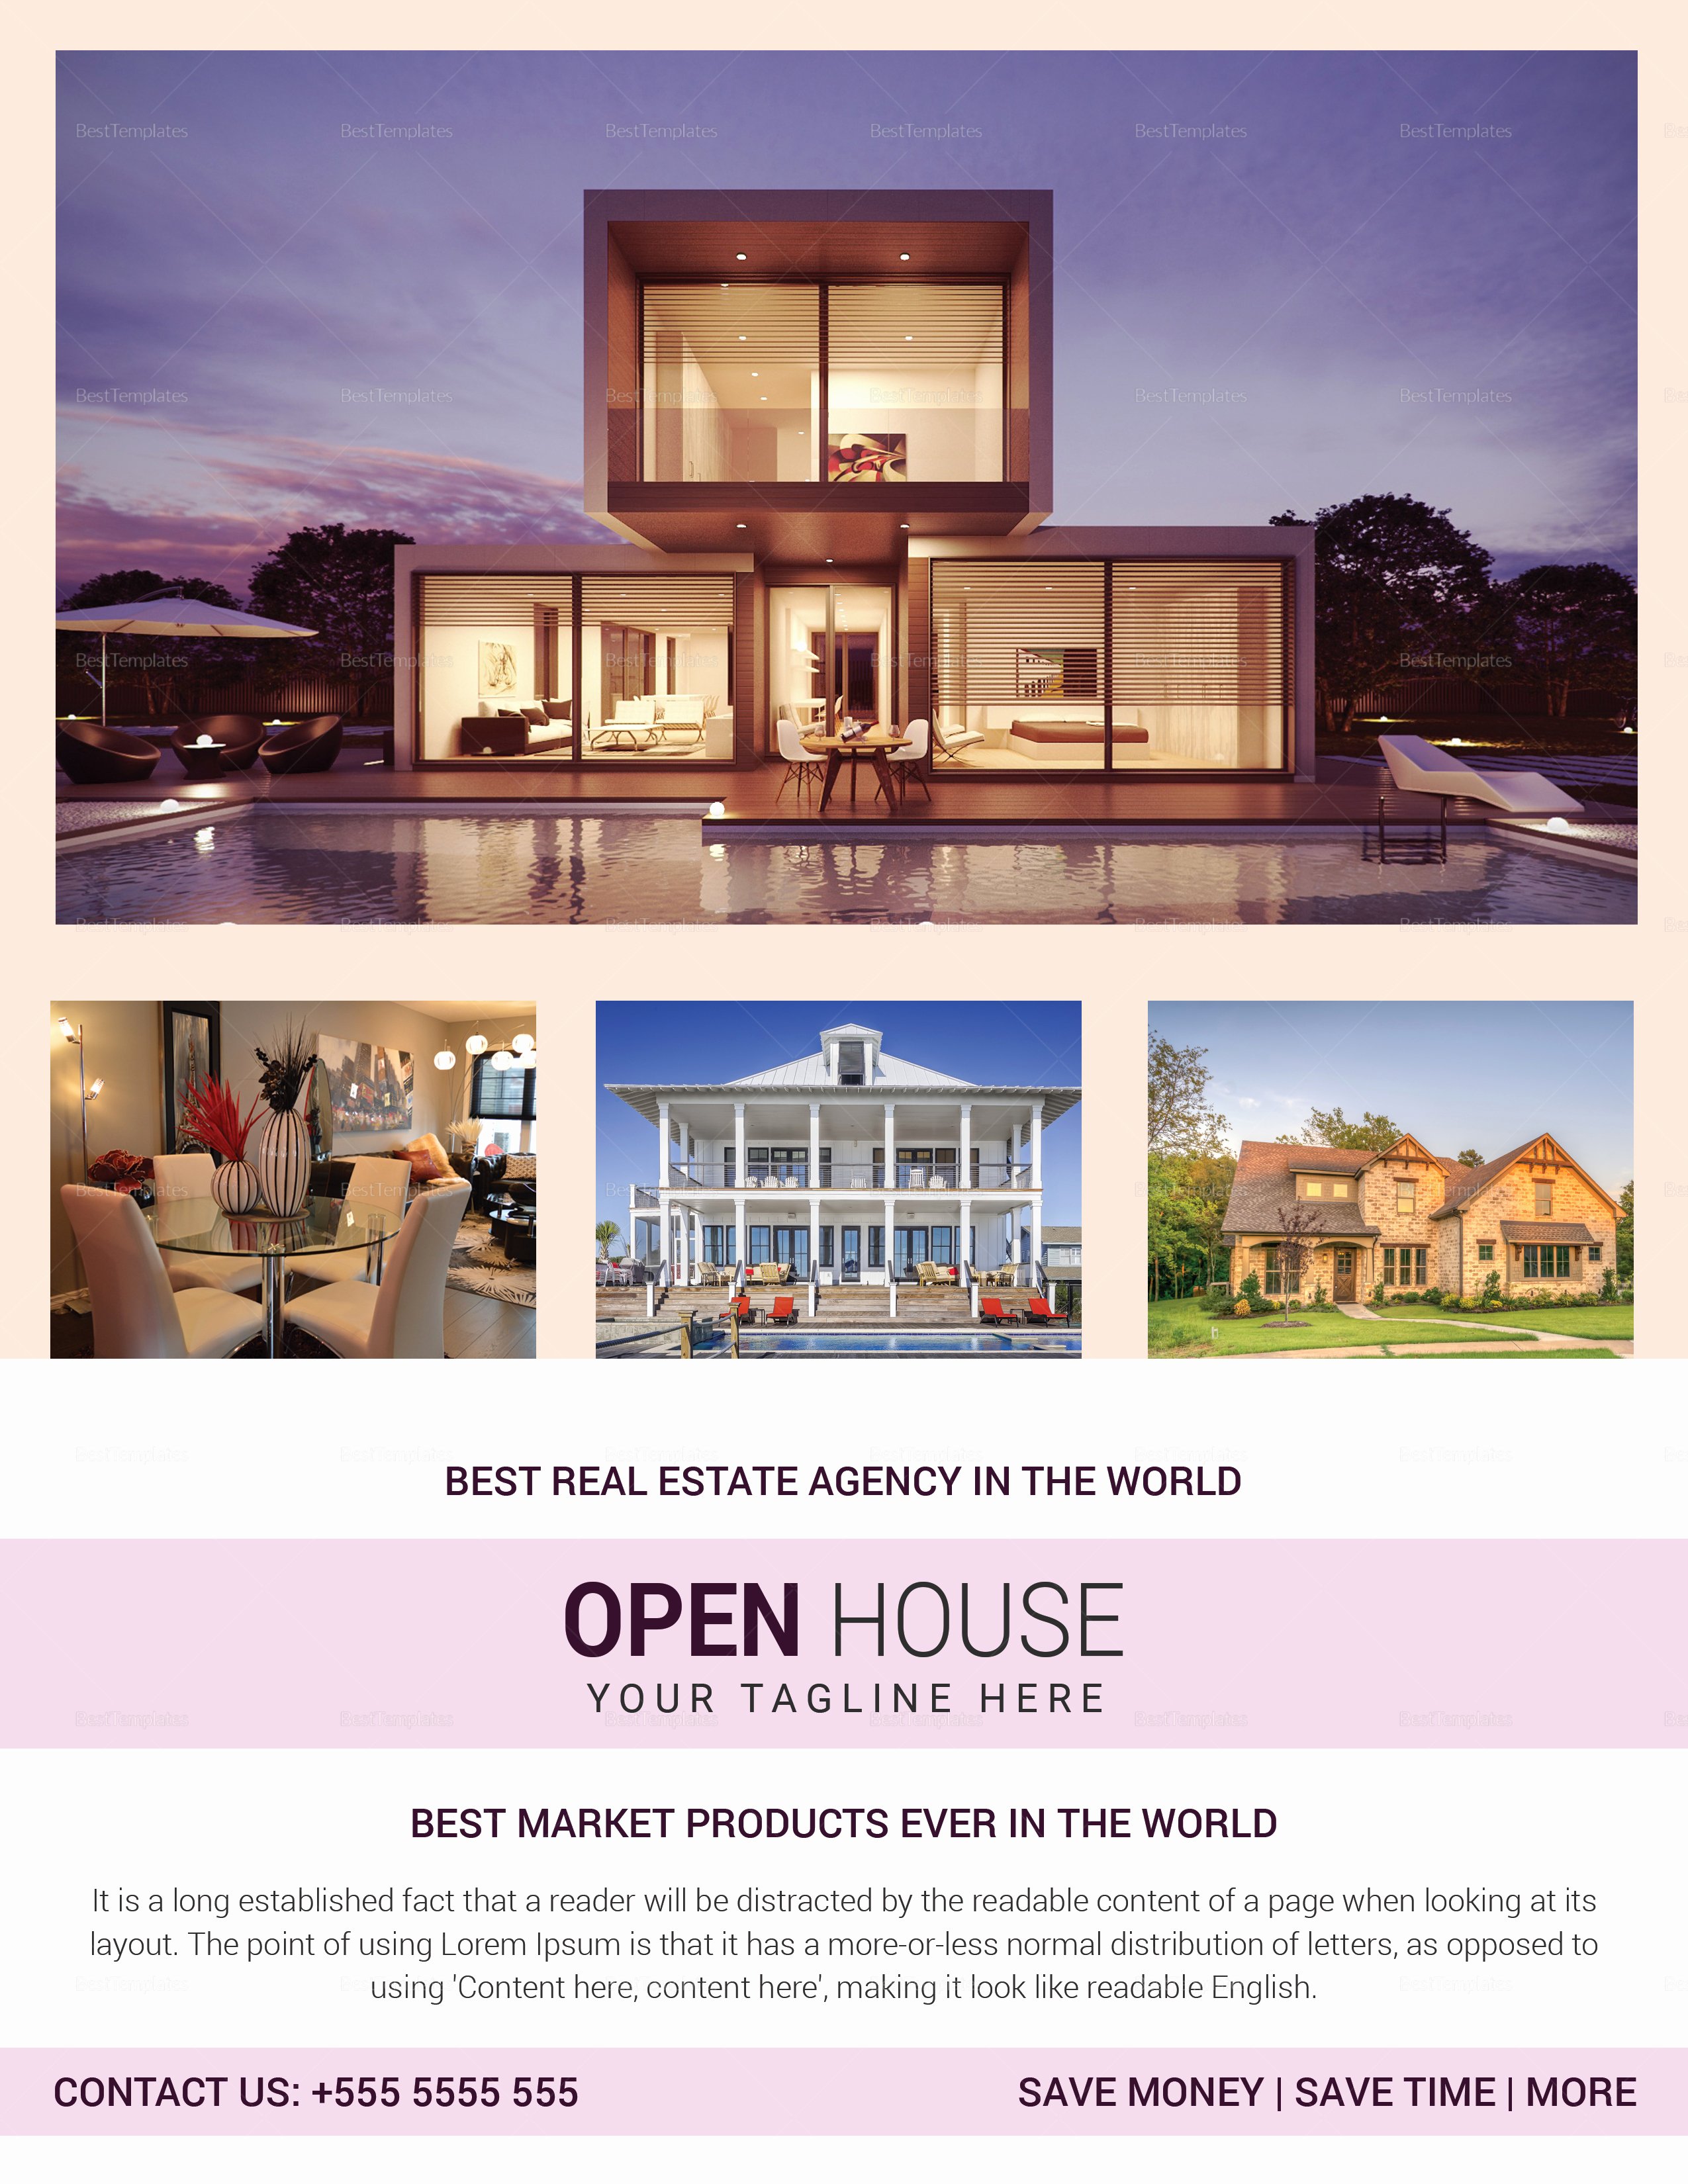 Open House Flyer Template Publisher Beautiful Real Estate Agency Open House Flyer Design Template In